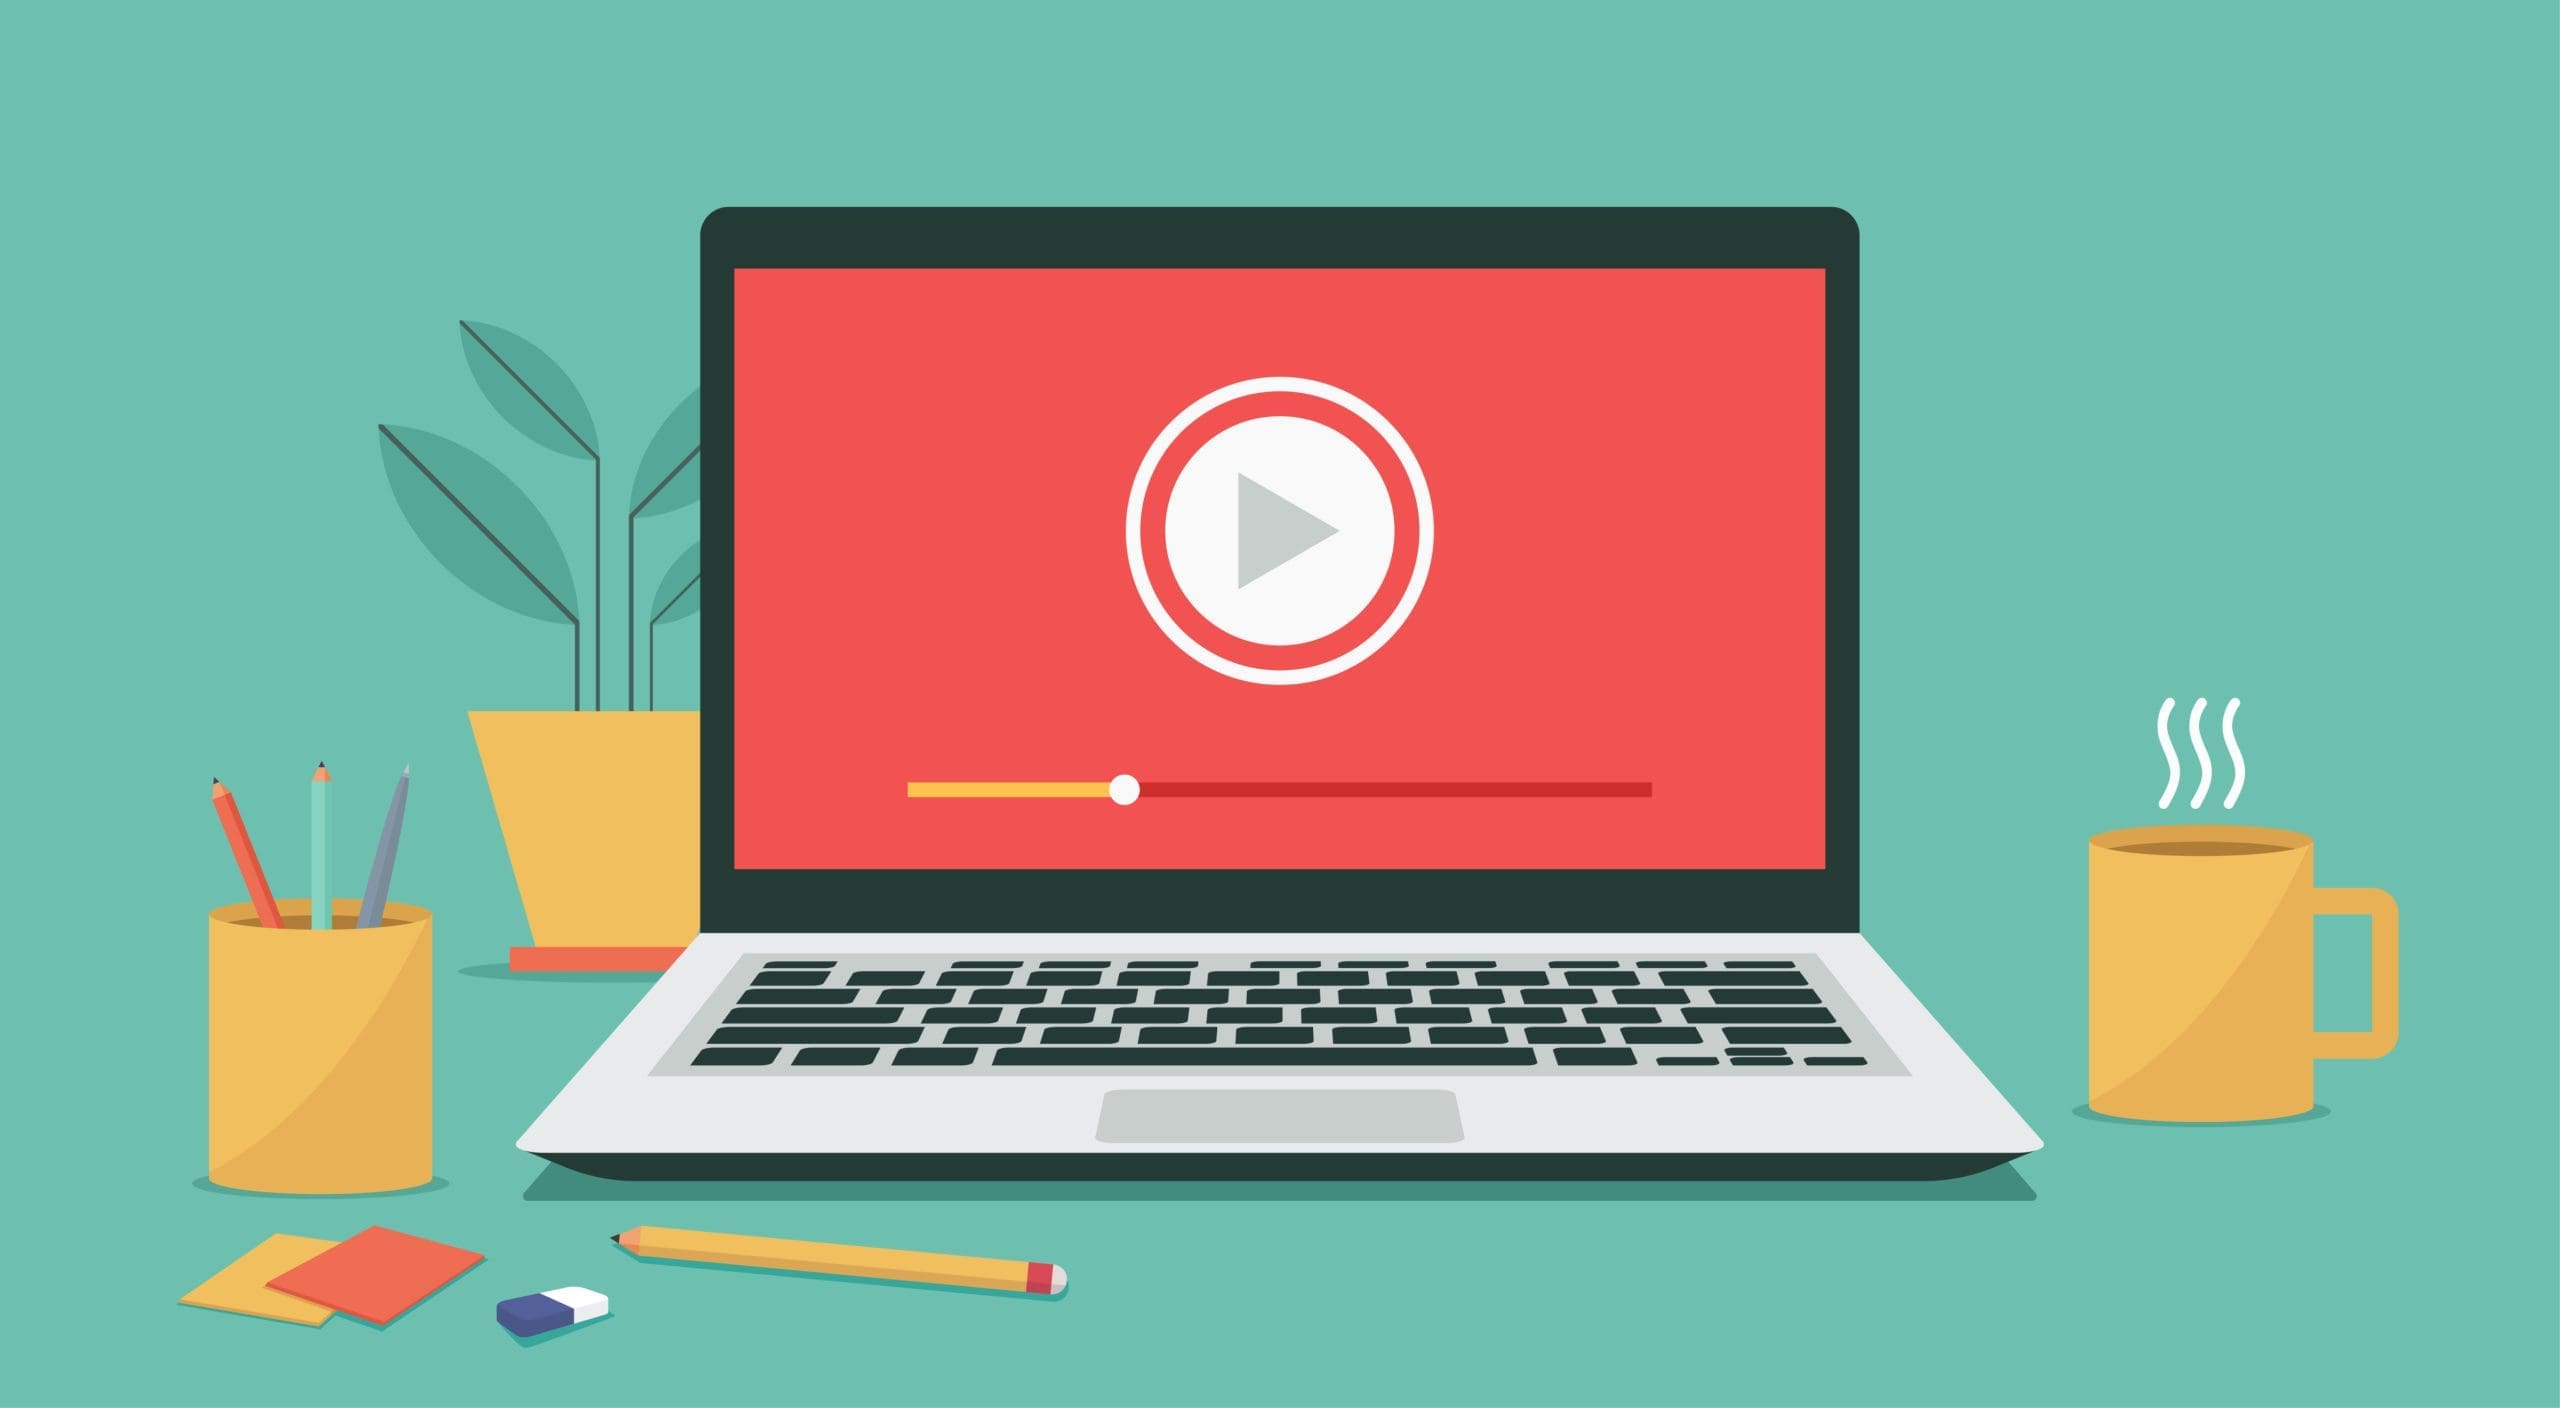 video content strategy